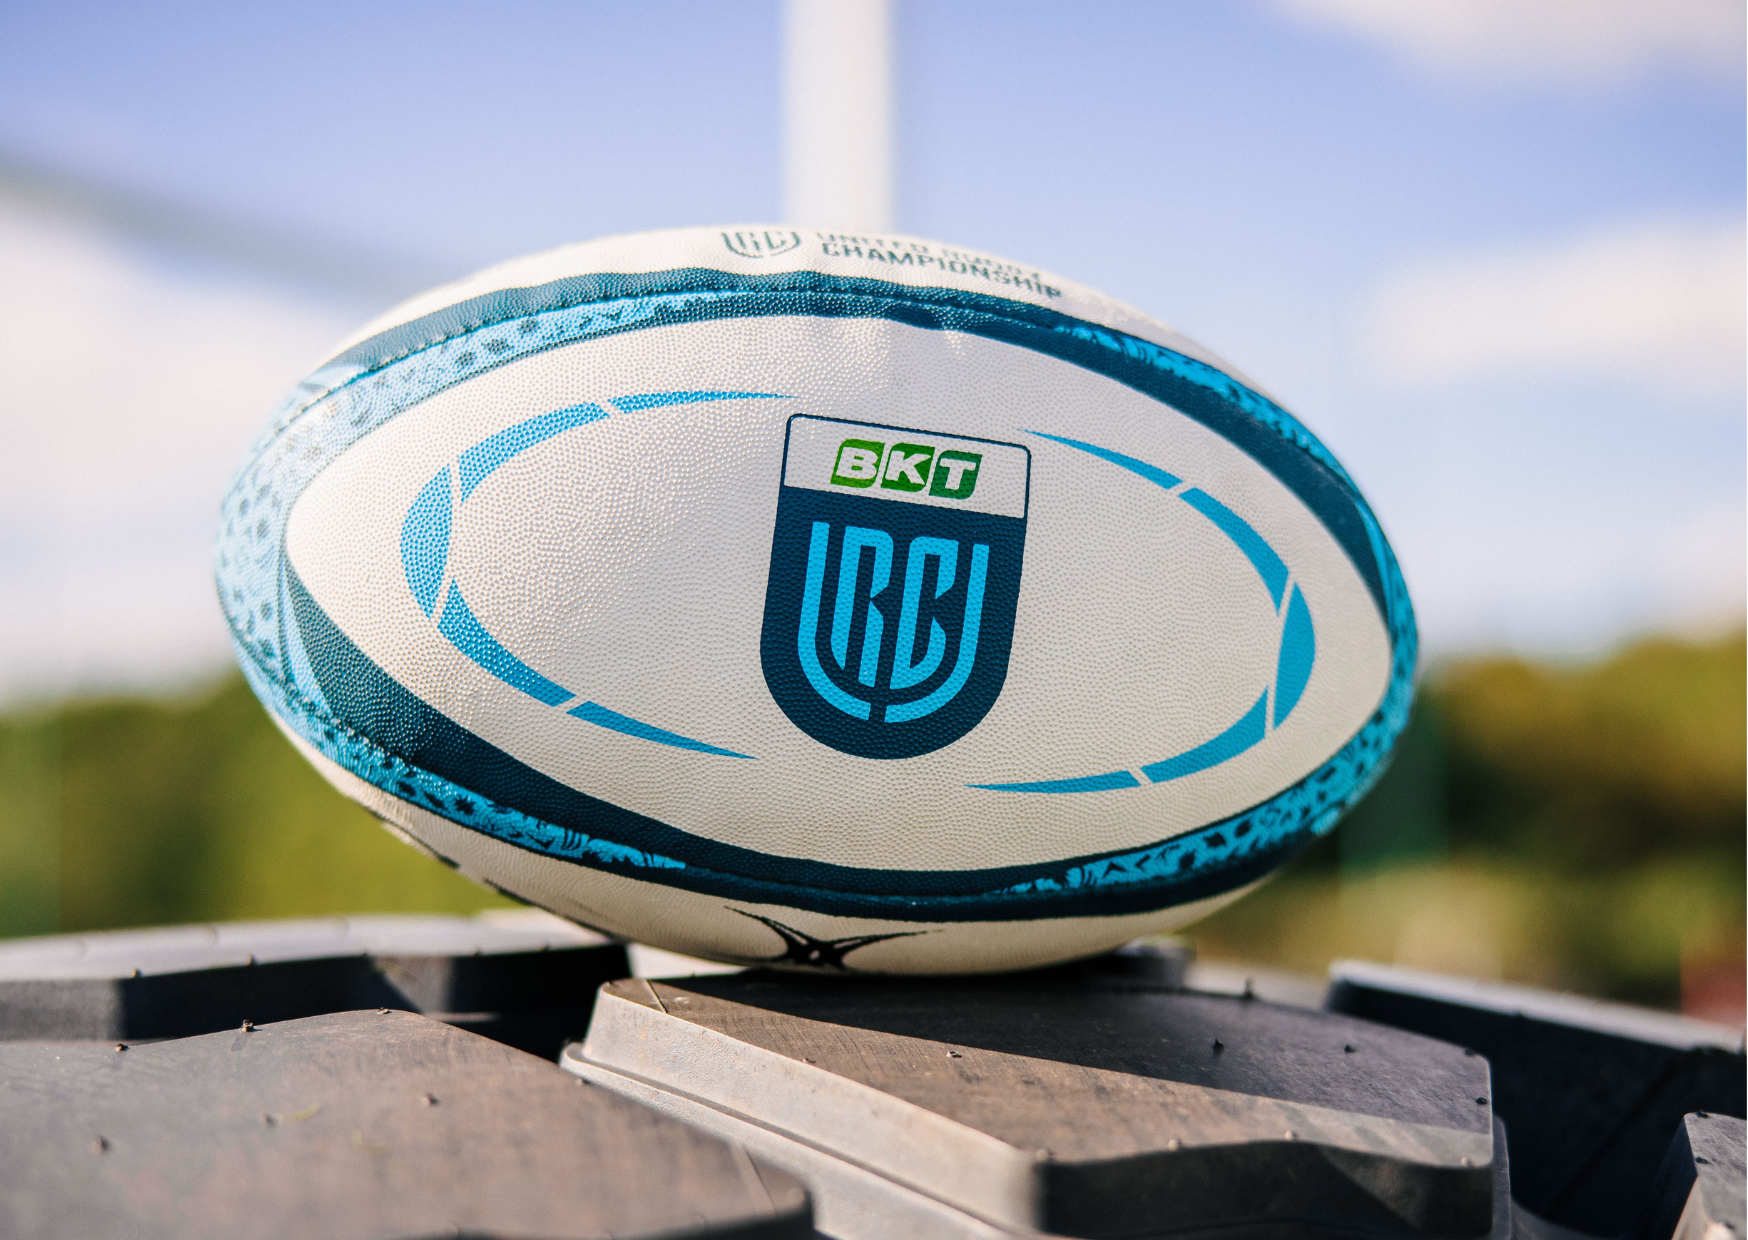 PLAY-OFFS Kick-Off Times Confirmed for BKT United Rugby Championship Quarter-Finals